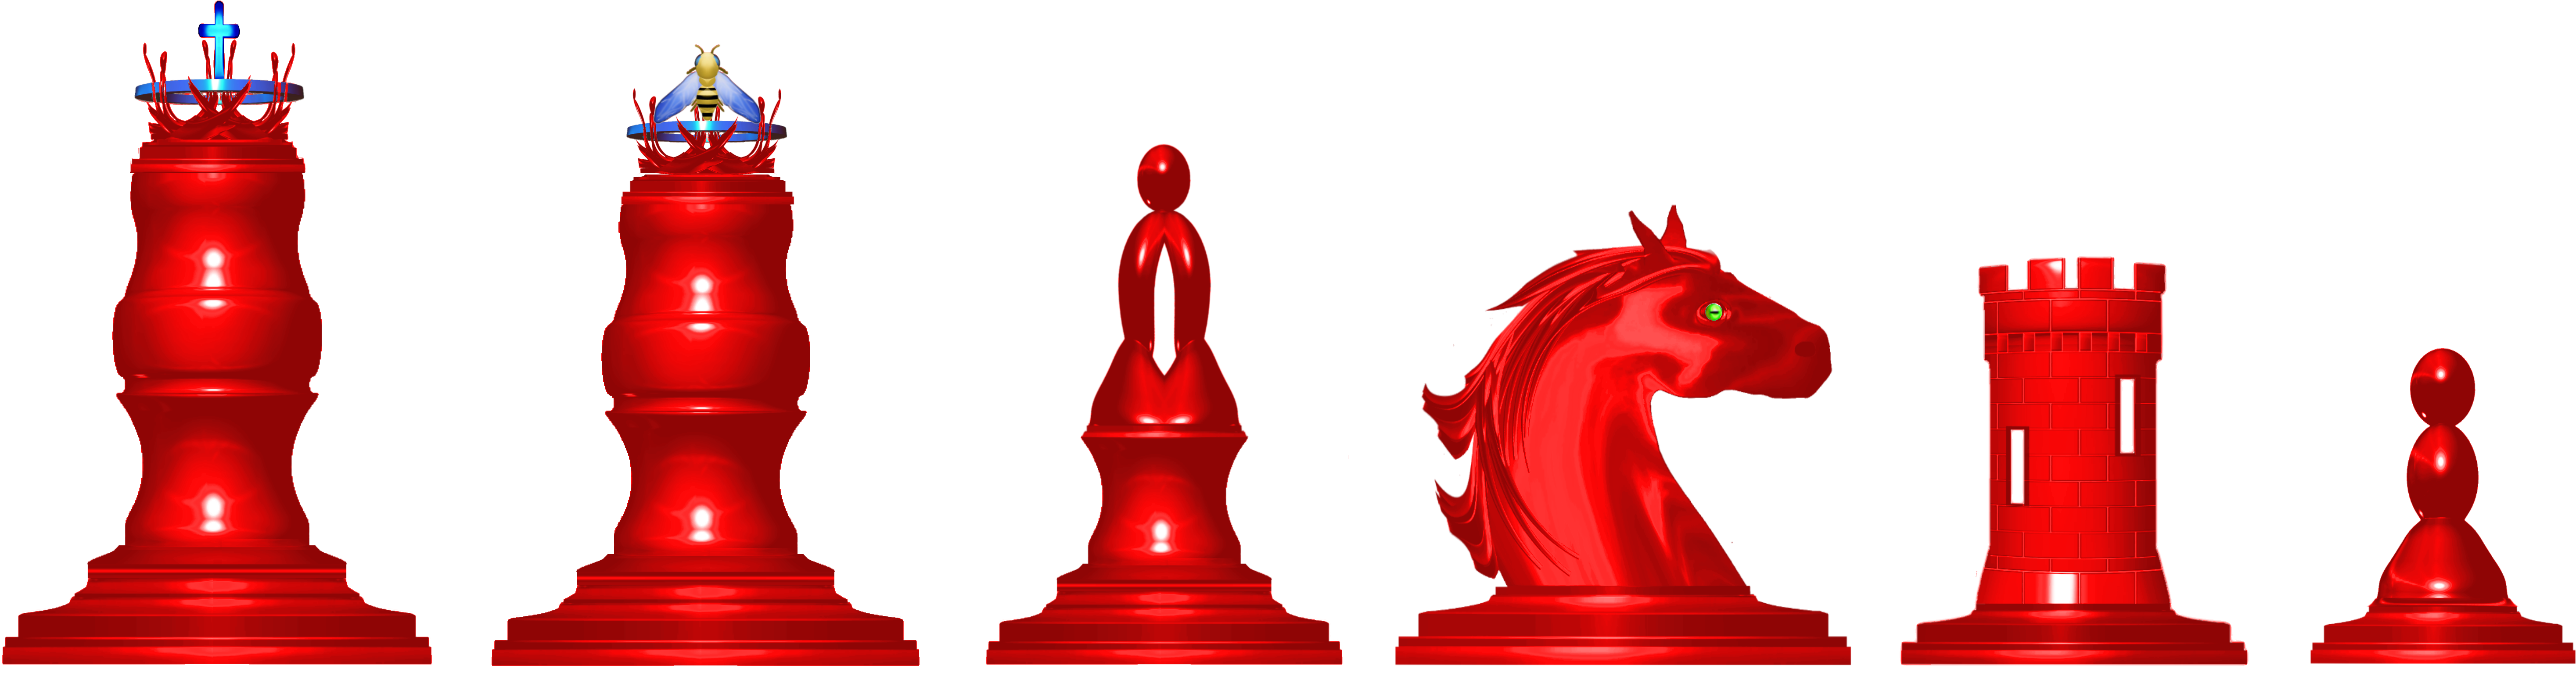 Chess Pieces - Chess (6000x1700)